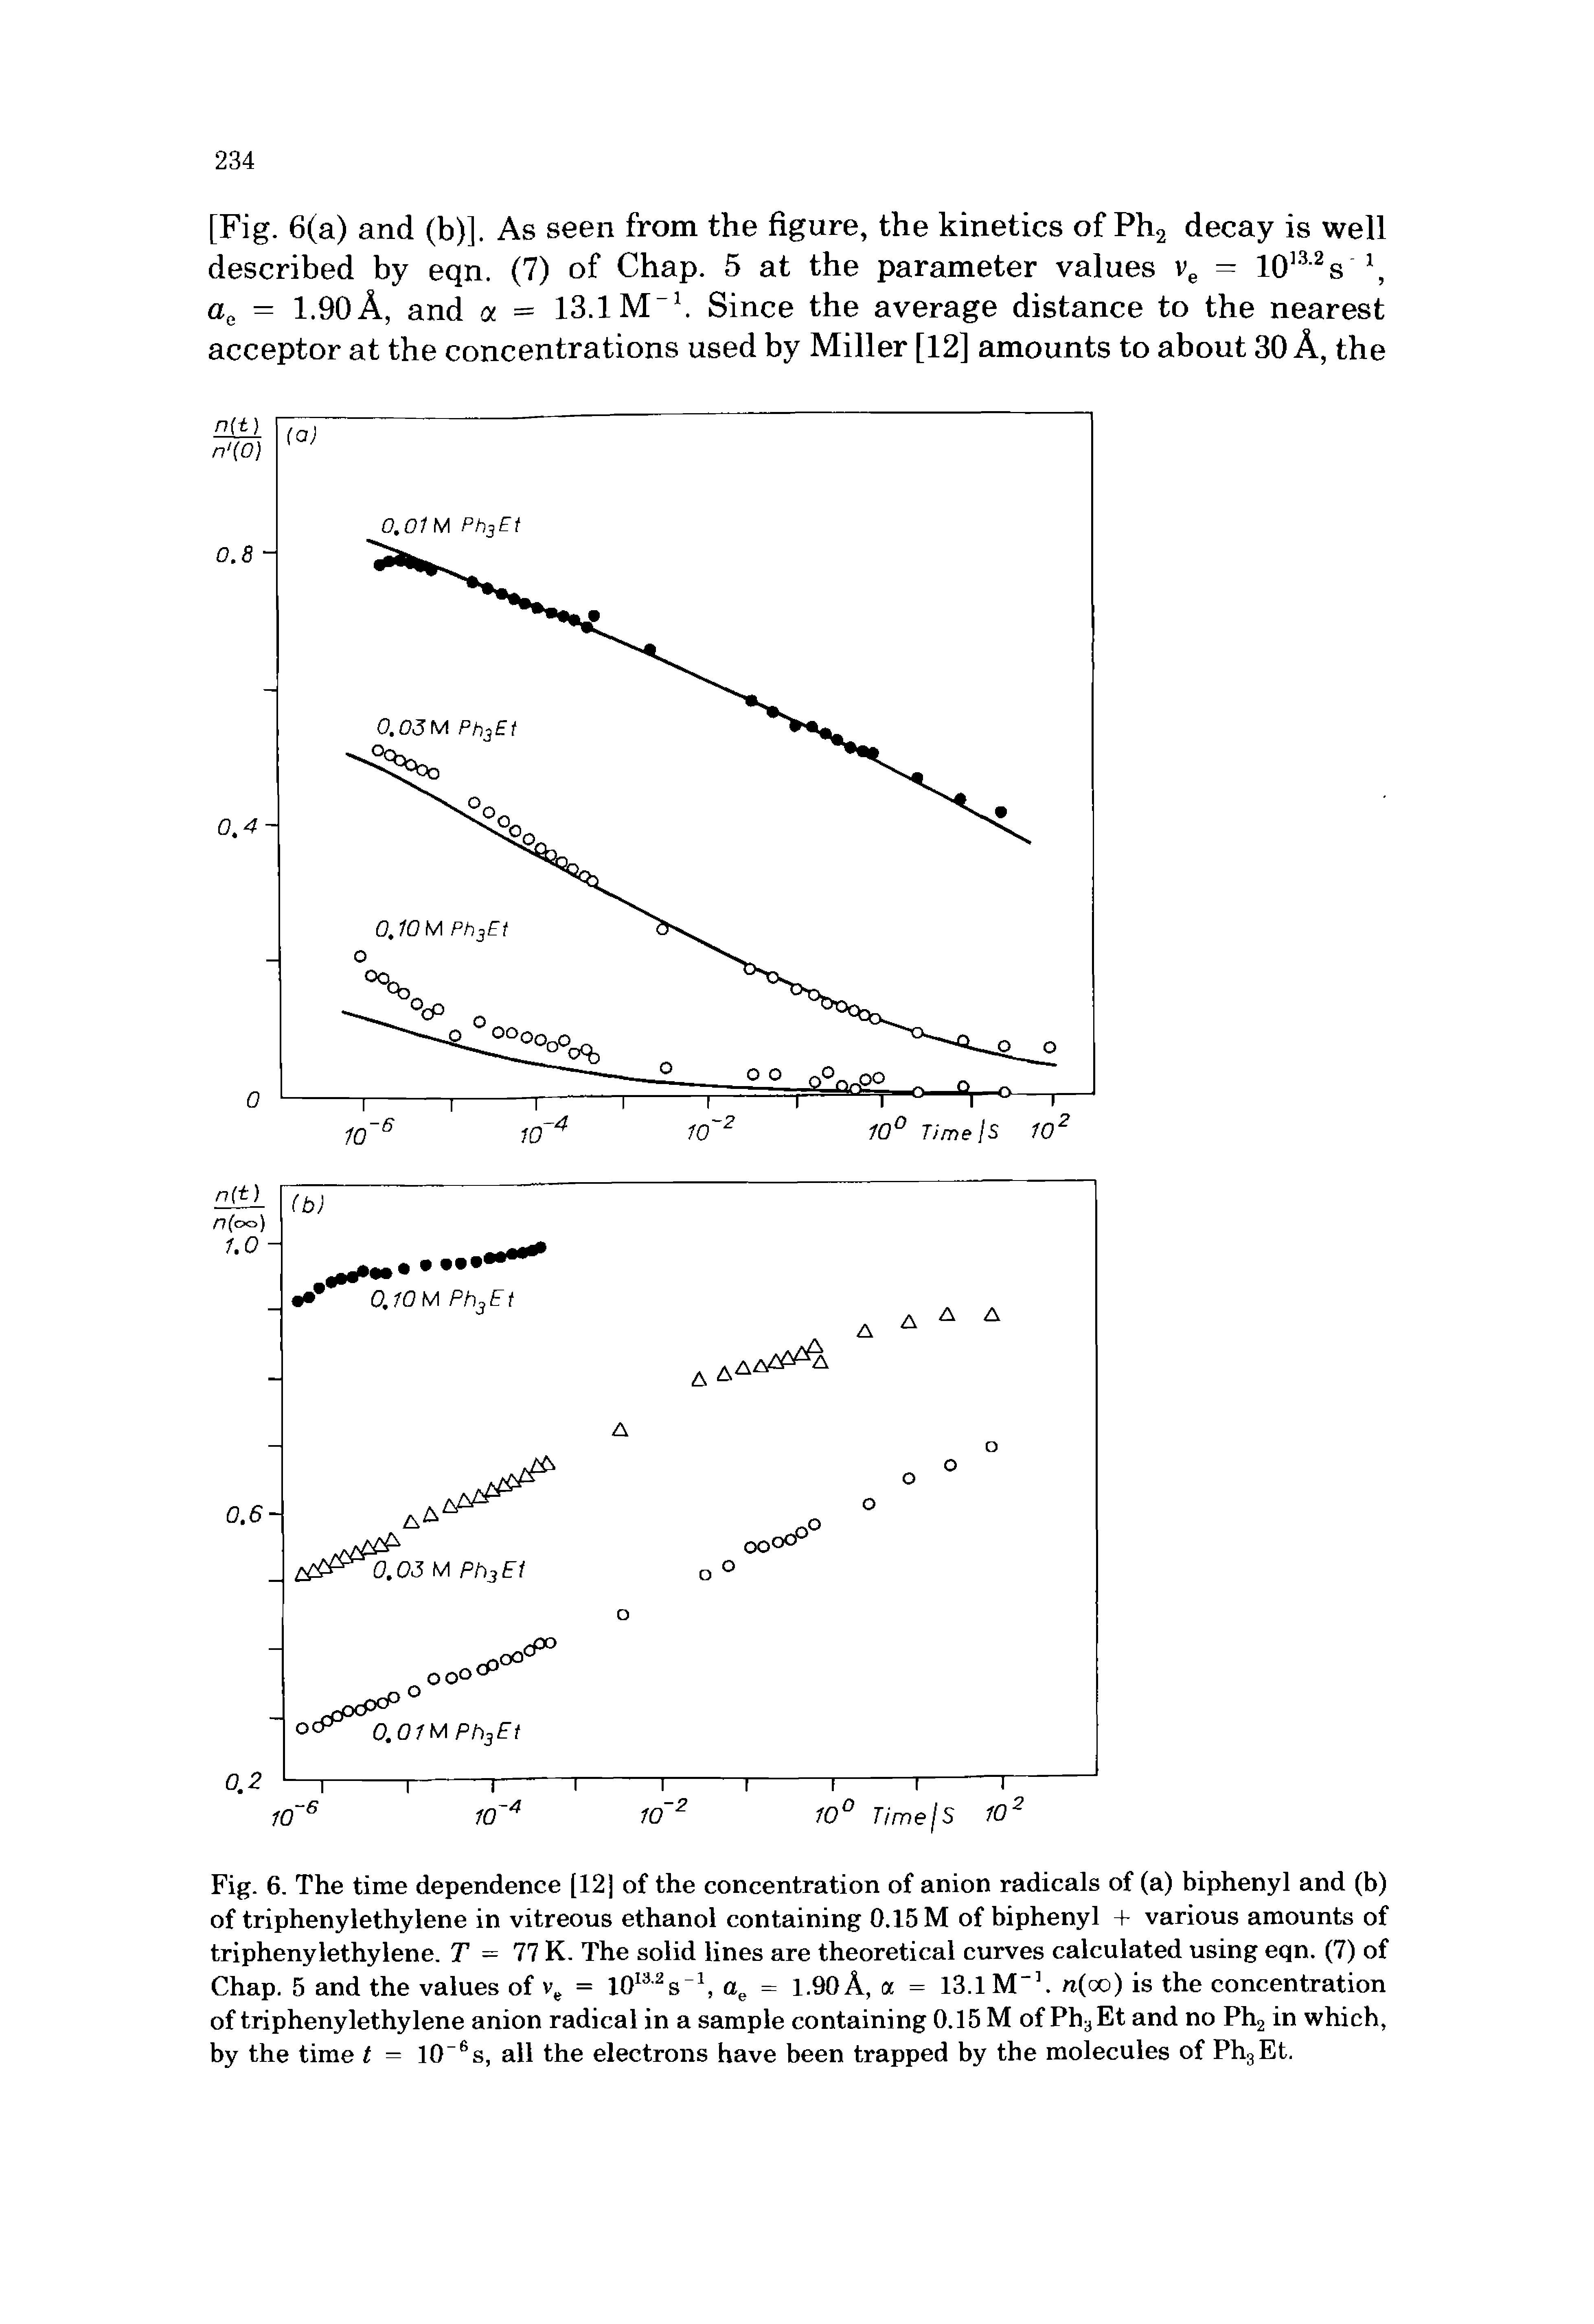 Fig. 6. The time dependence [12] of the concentration of anion radicals of (a) biphenyl and (b) of triphenylethylene in vitreous ethanol containing 0.15 M of biphenyl + various amounts of triphenylethylene. T — 77 K. The solid lines are theoretical curves calculated using eqn. (7) of Chap. 5 and the values of ve = I0132s 1, ae = 1.90A, a = 13.1 M-1. n(oo) is the concentration of triphenylethylene anion radical in a sample containing 0.15 M of PhaEt and no Ph2 in which, by the time t = 10 6s, all the electrons have been trapped by the molecules of Ph3Et.